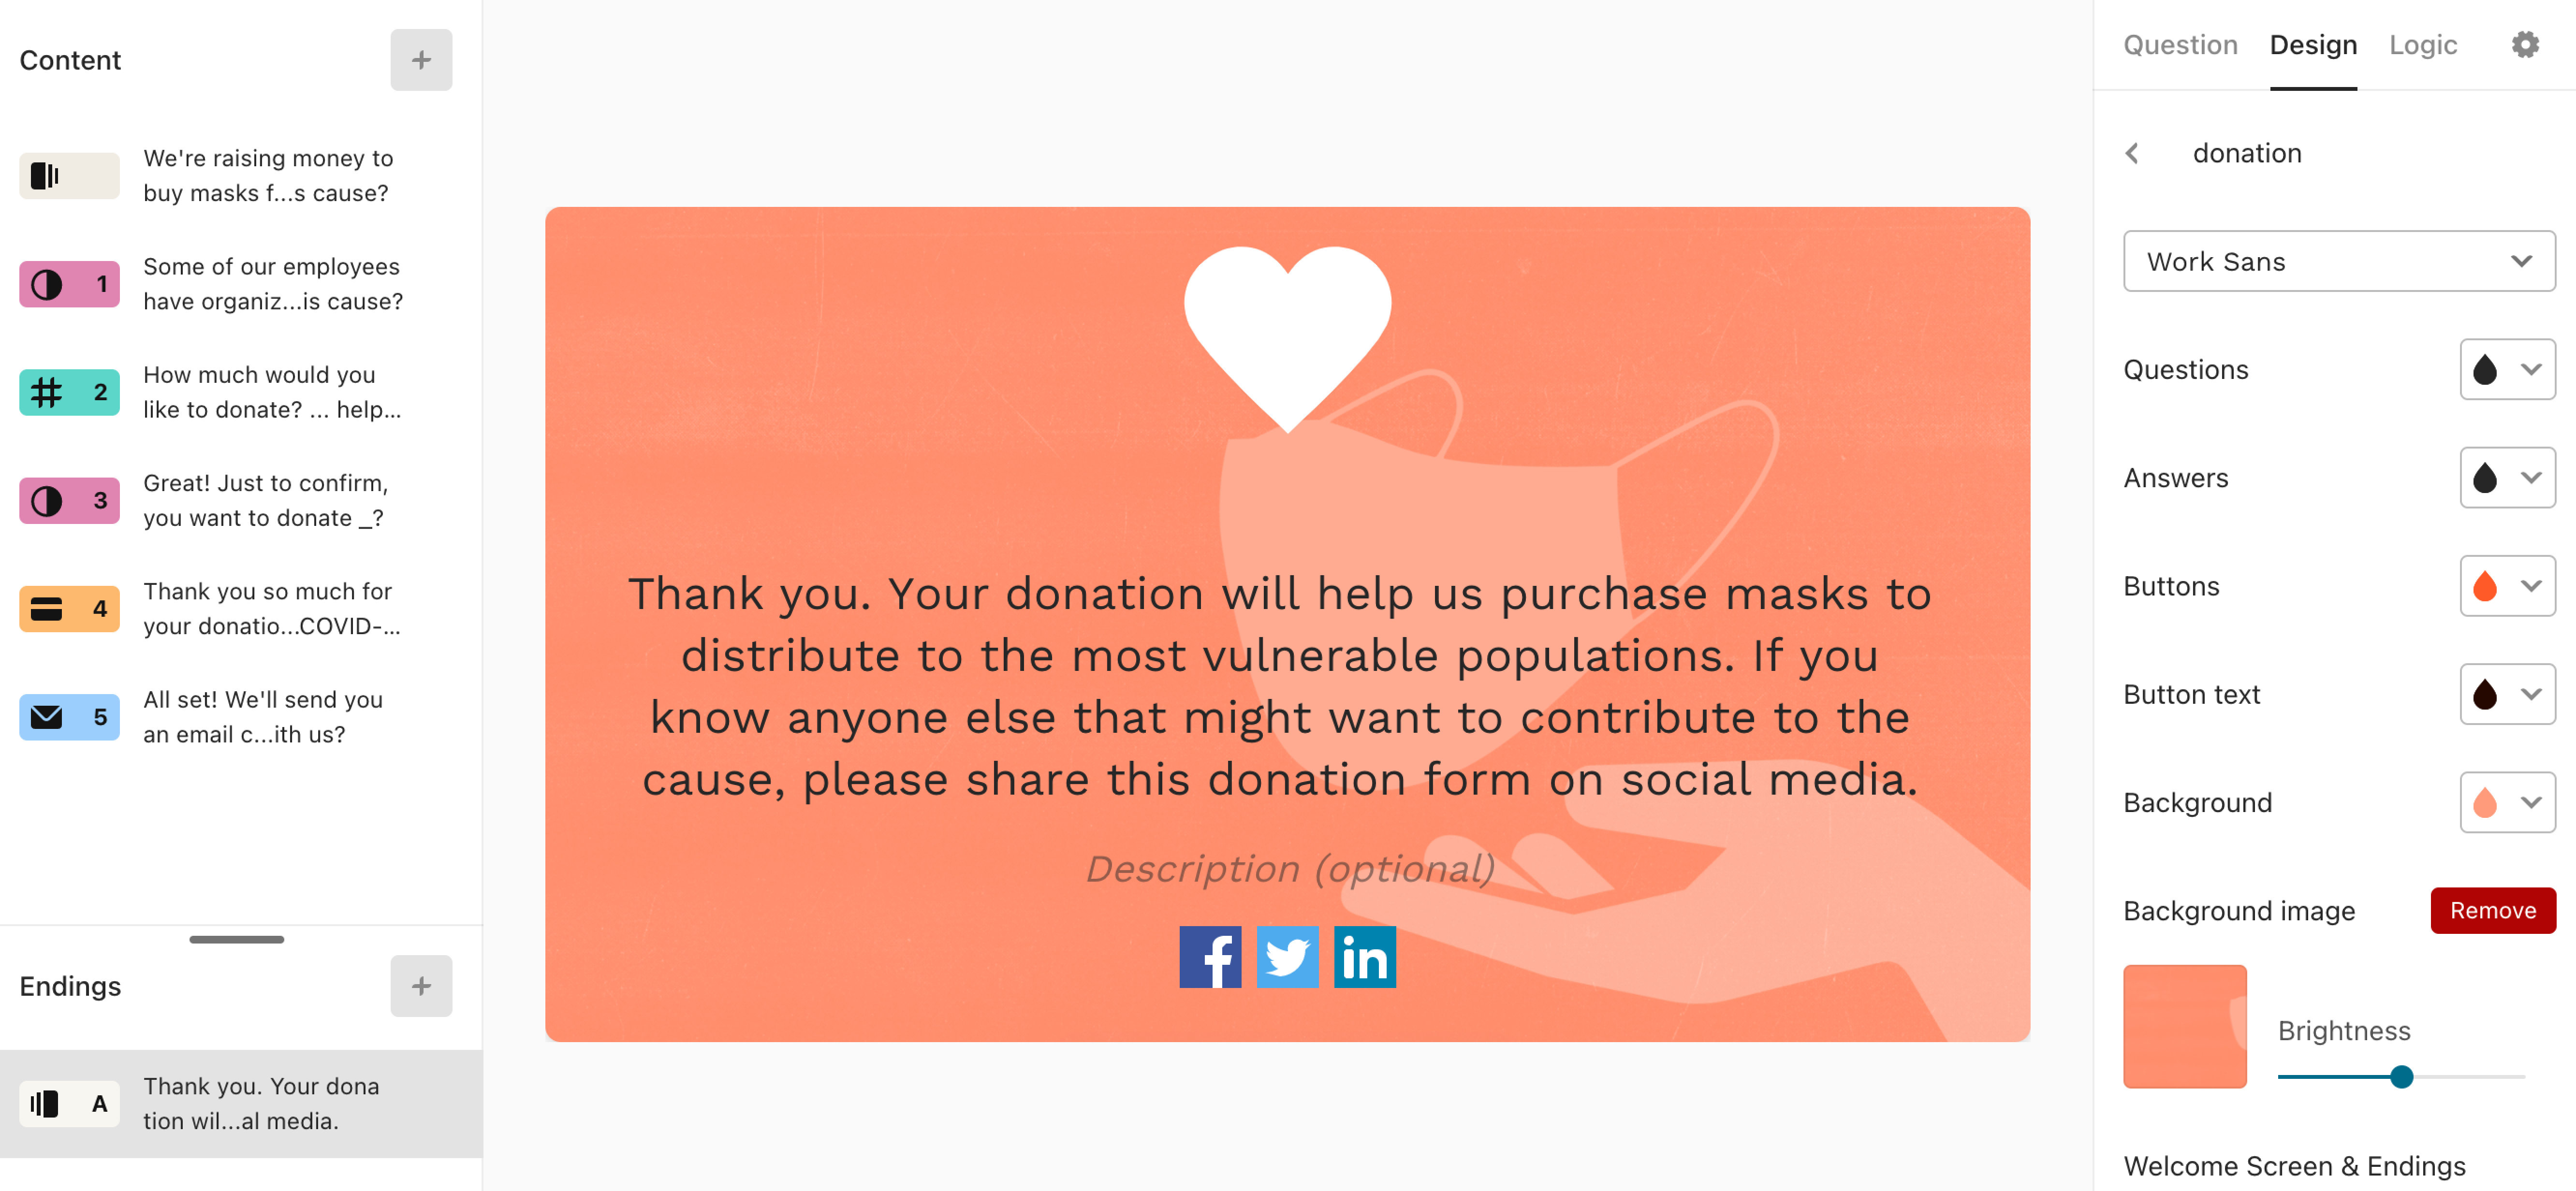 donation10.png